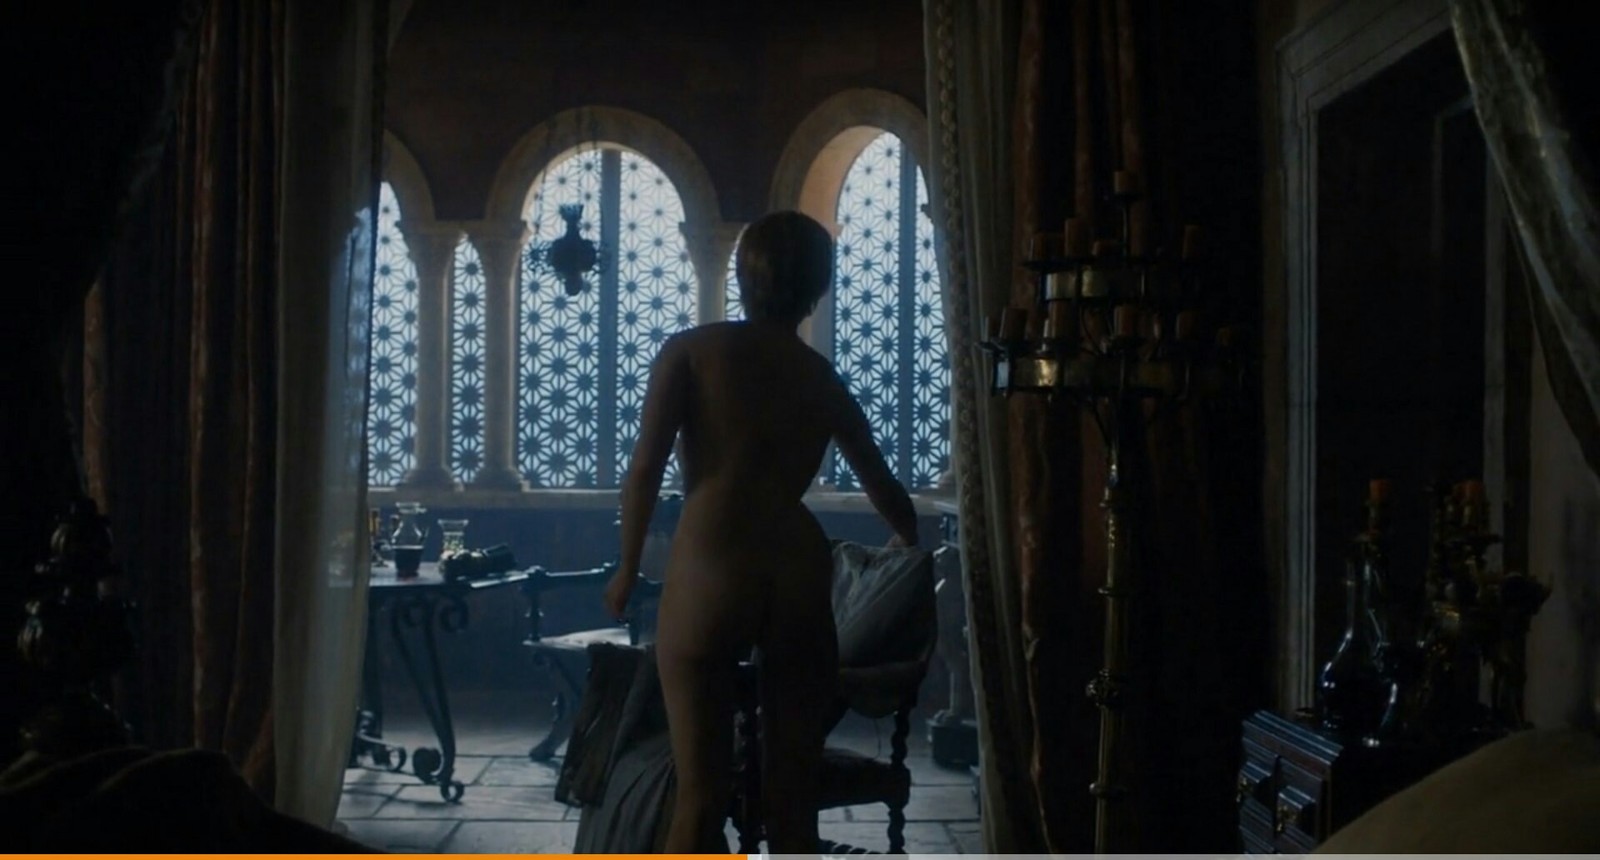 Lannister Buns - NSFW, My, Game of Thrones, Game of Thrones Season 7, Lannister, Cersei Lannister, Jaime Lannister